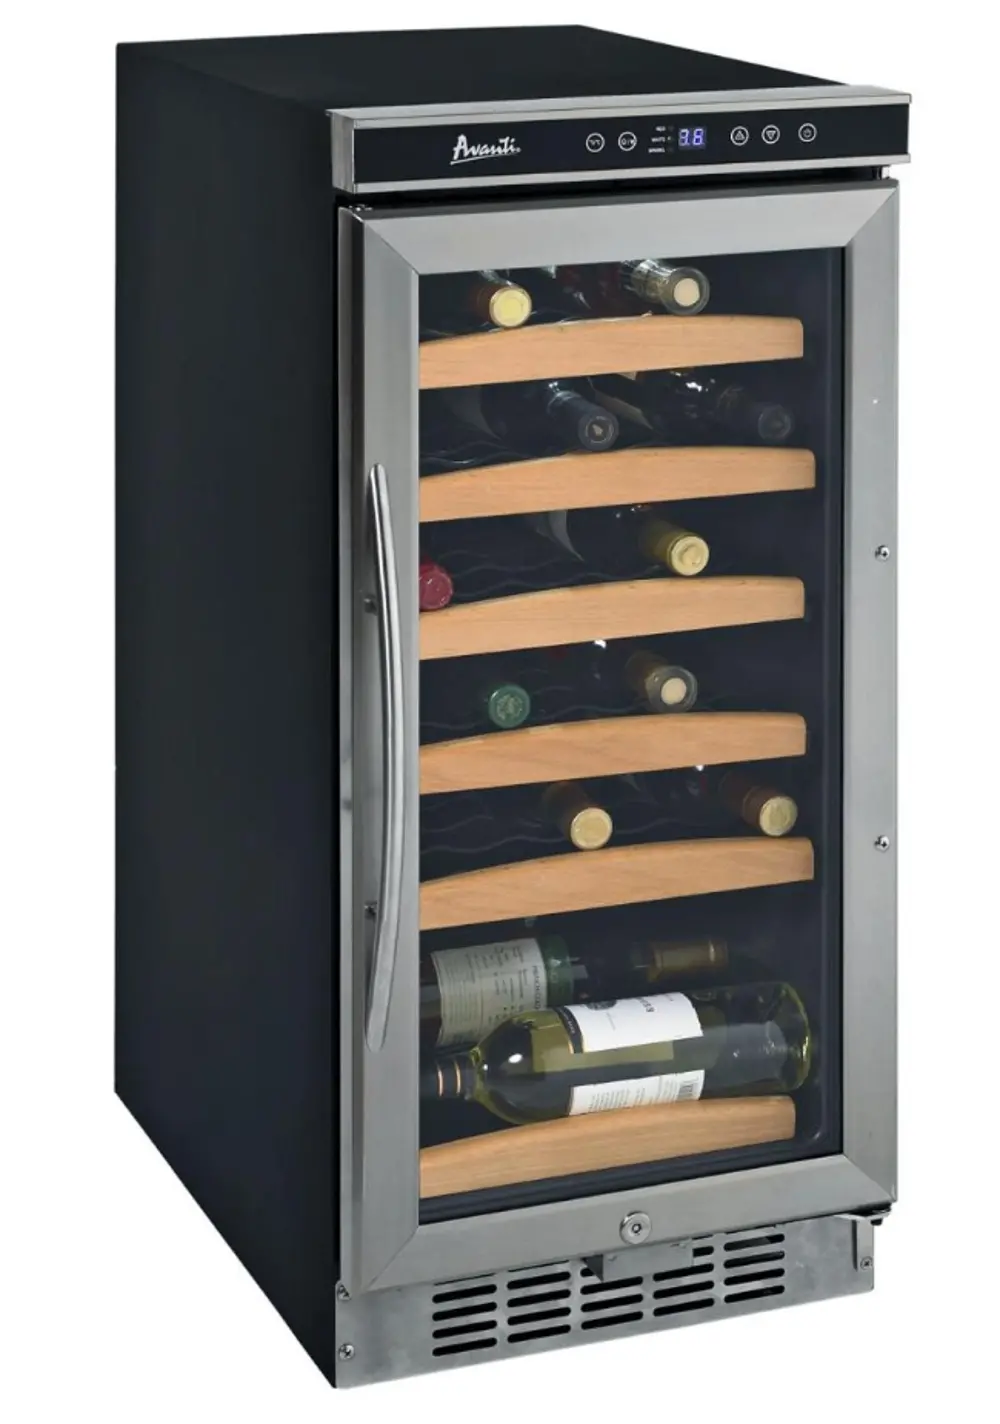 WC1500DSS Avanti 30 Bottle Wine Cooler with Electronic Display - Black and Stainless Steel -1